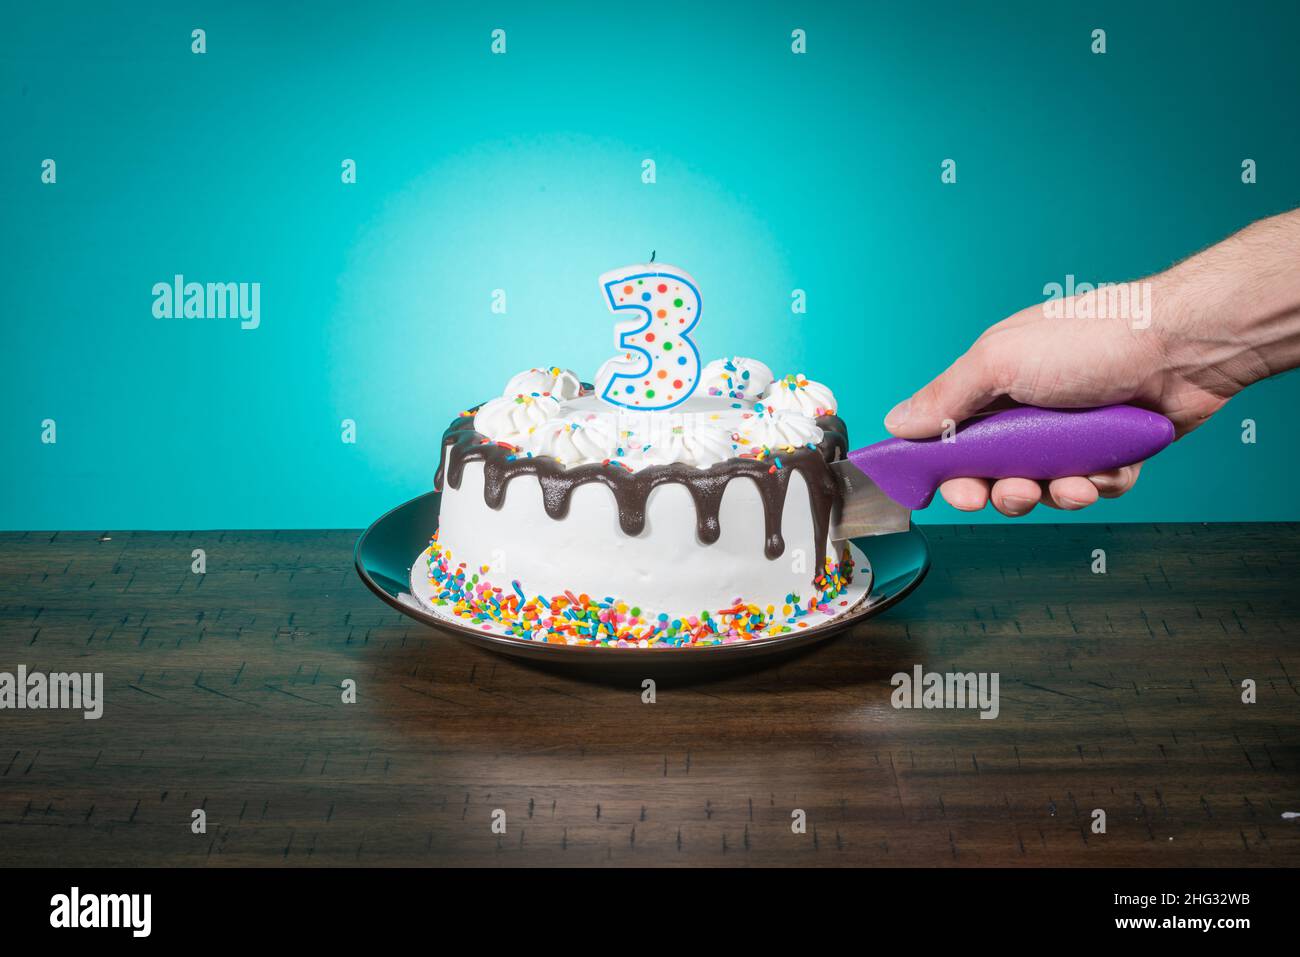 A birthday cake bears a candle in the shape of the number 3 while a hand cuts a slice. Stock Photo